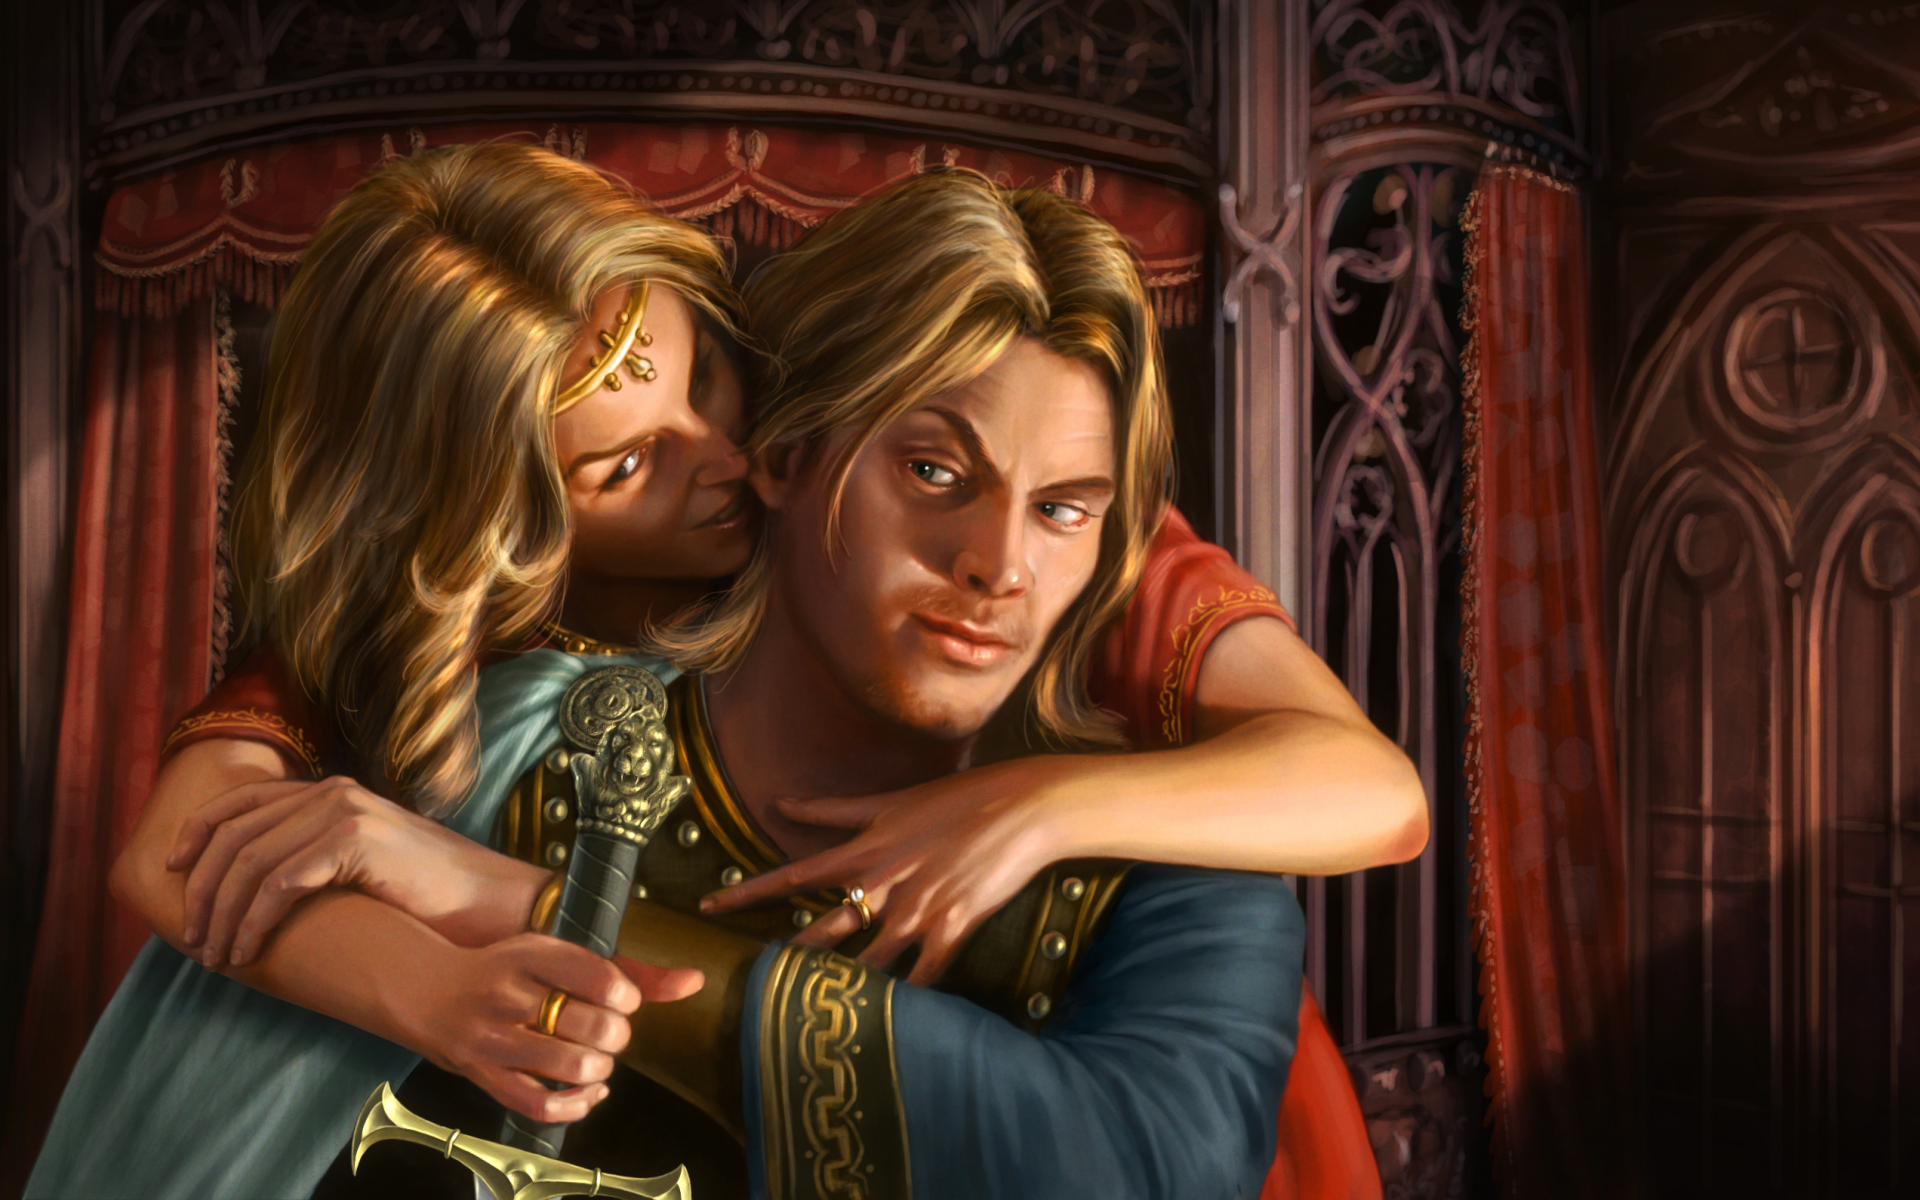 a song of ice and fire, game of thrones, fantasy flight games, henning ludvigsen, mutual blackmail